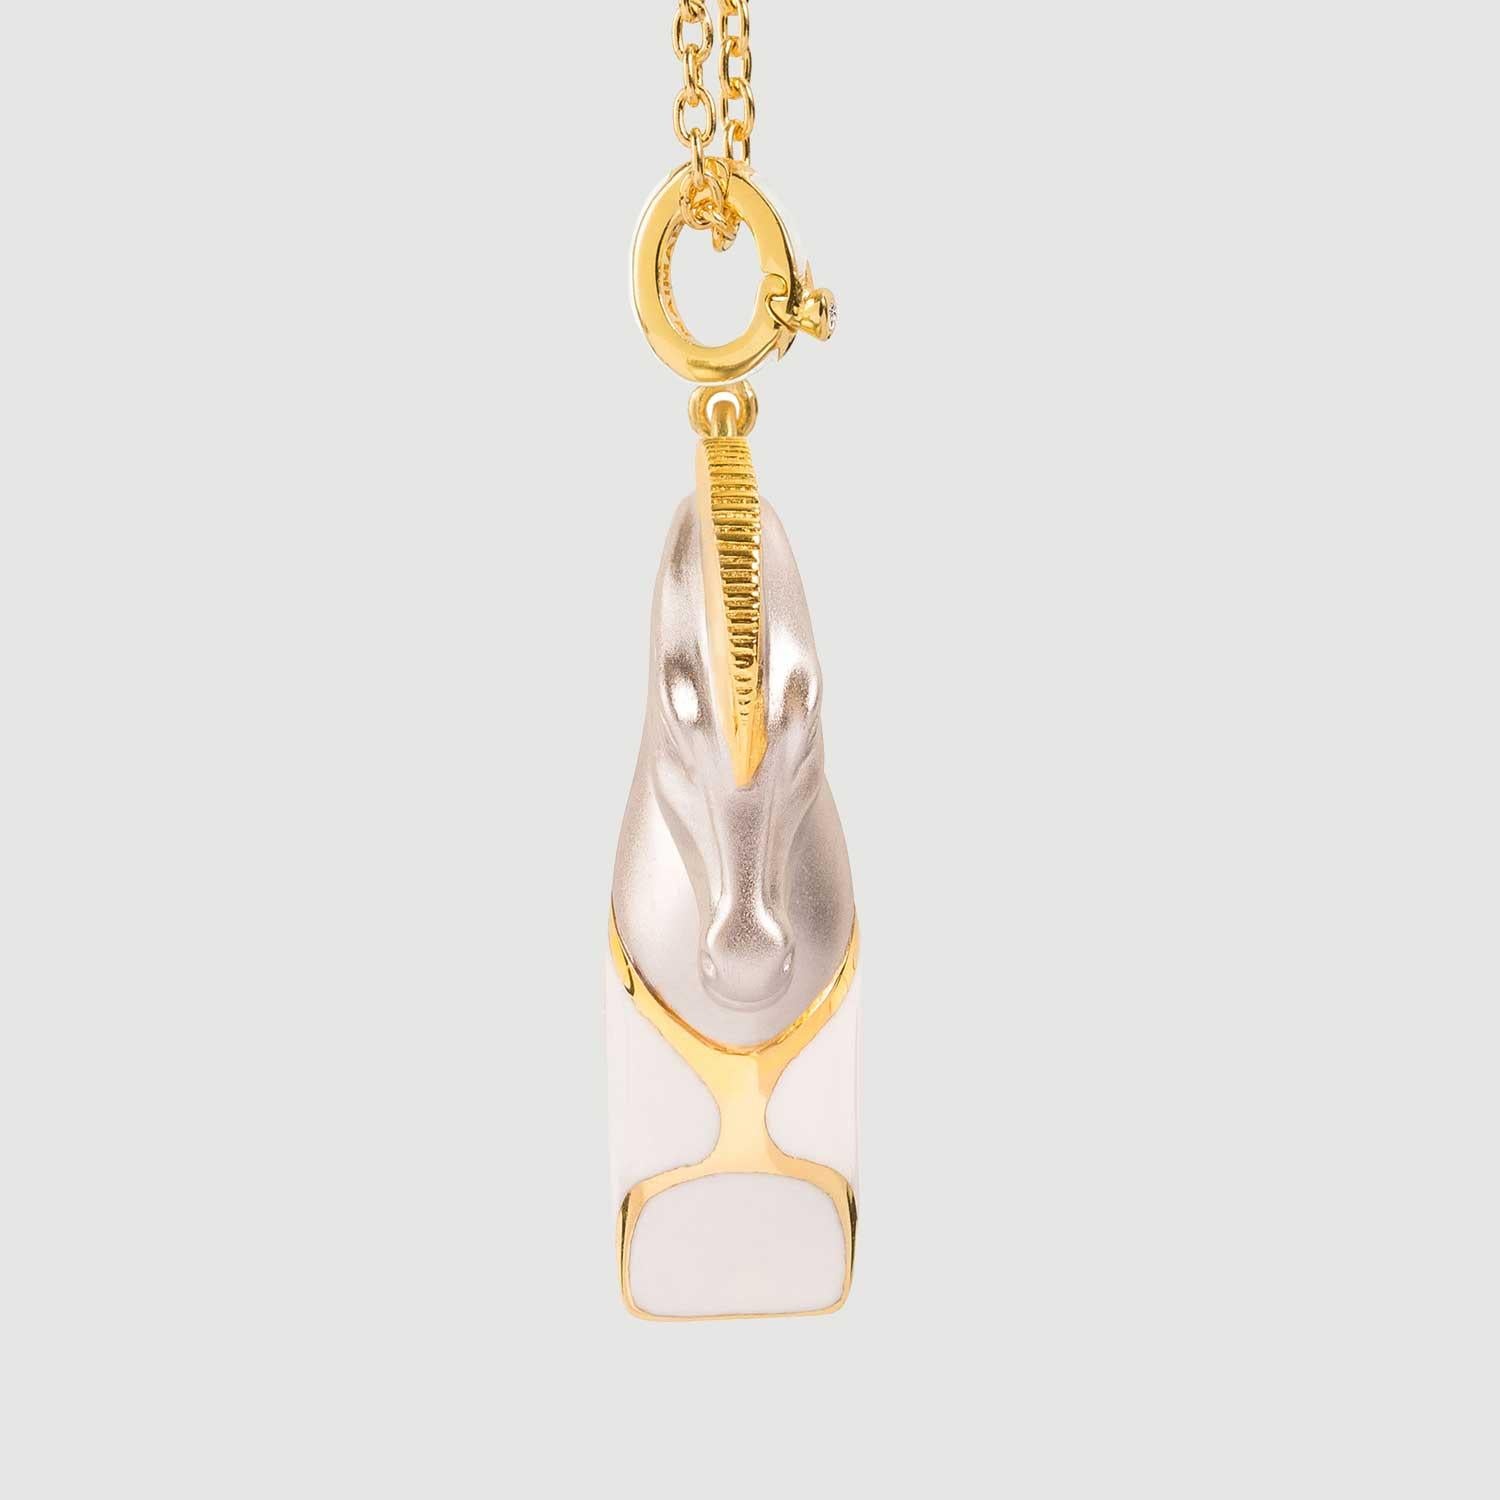 Horse symbolism and meanings include determination, endurance, valor, freedom, travel, beauty, majesty, and spirit.

Horses were revered in ancient Greece as symbols of wealth, power, and status.

Composition: 925 sterling silver, 18K gold vermeil